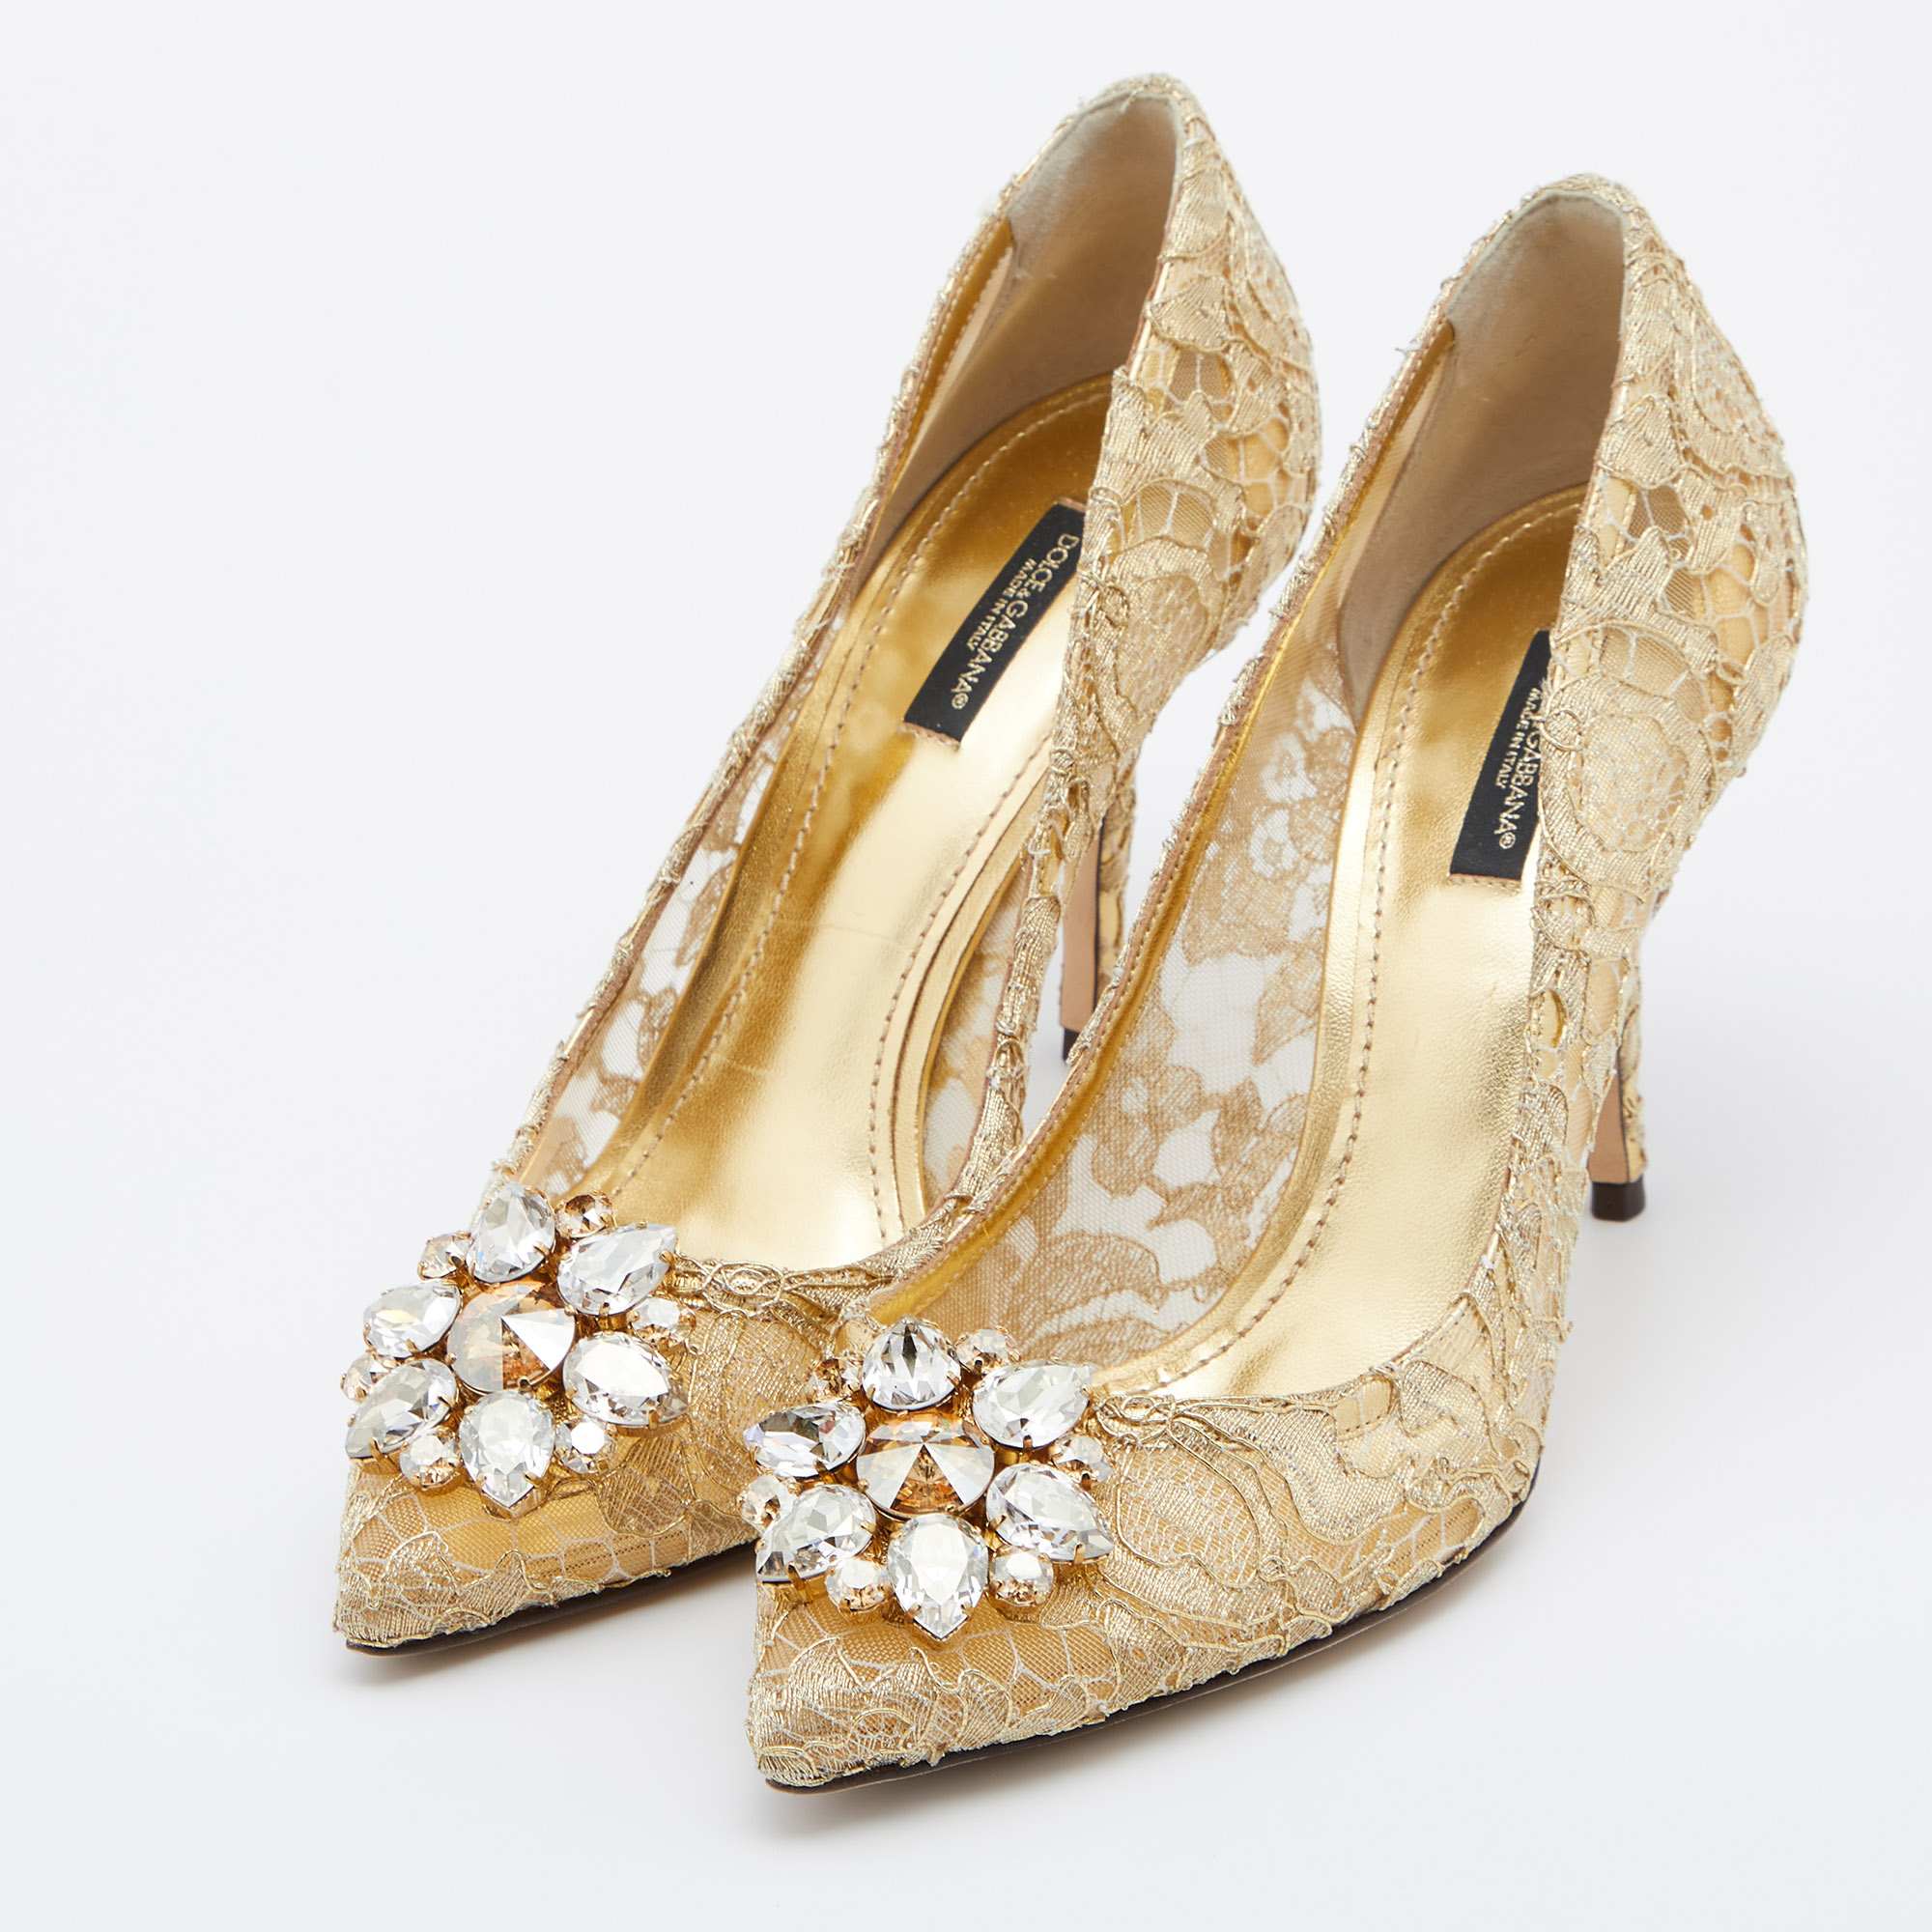 

Dolce & Gabbana Gold Lace Crystal Embellished Bellucci Pointed Toe Pumps Size